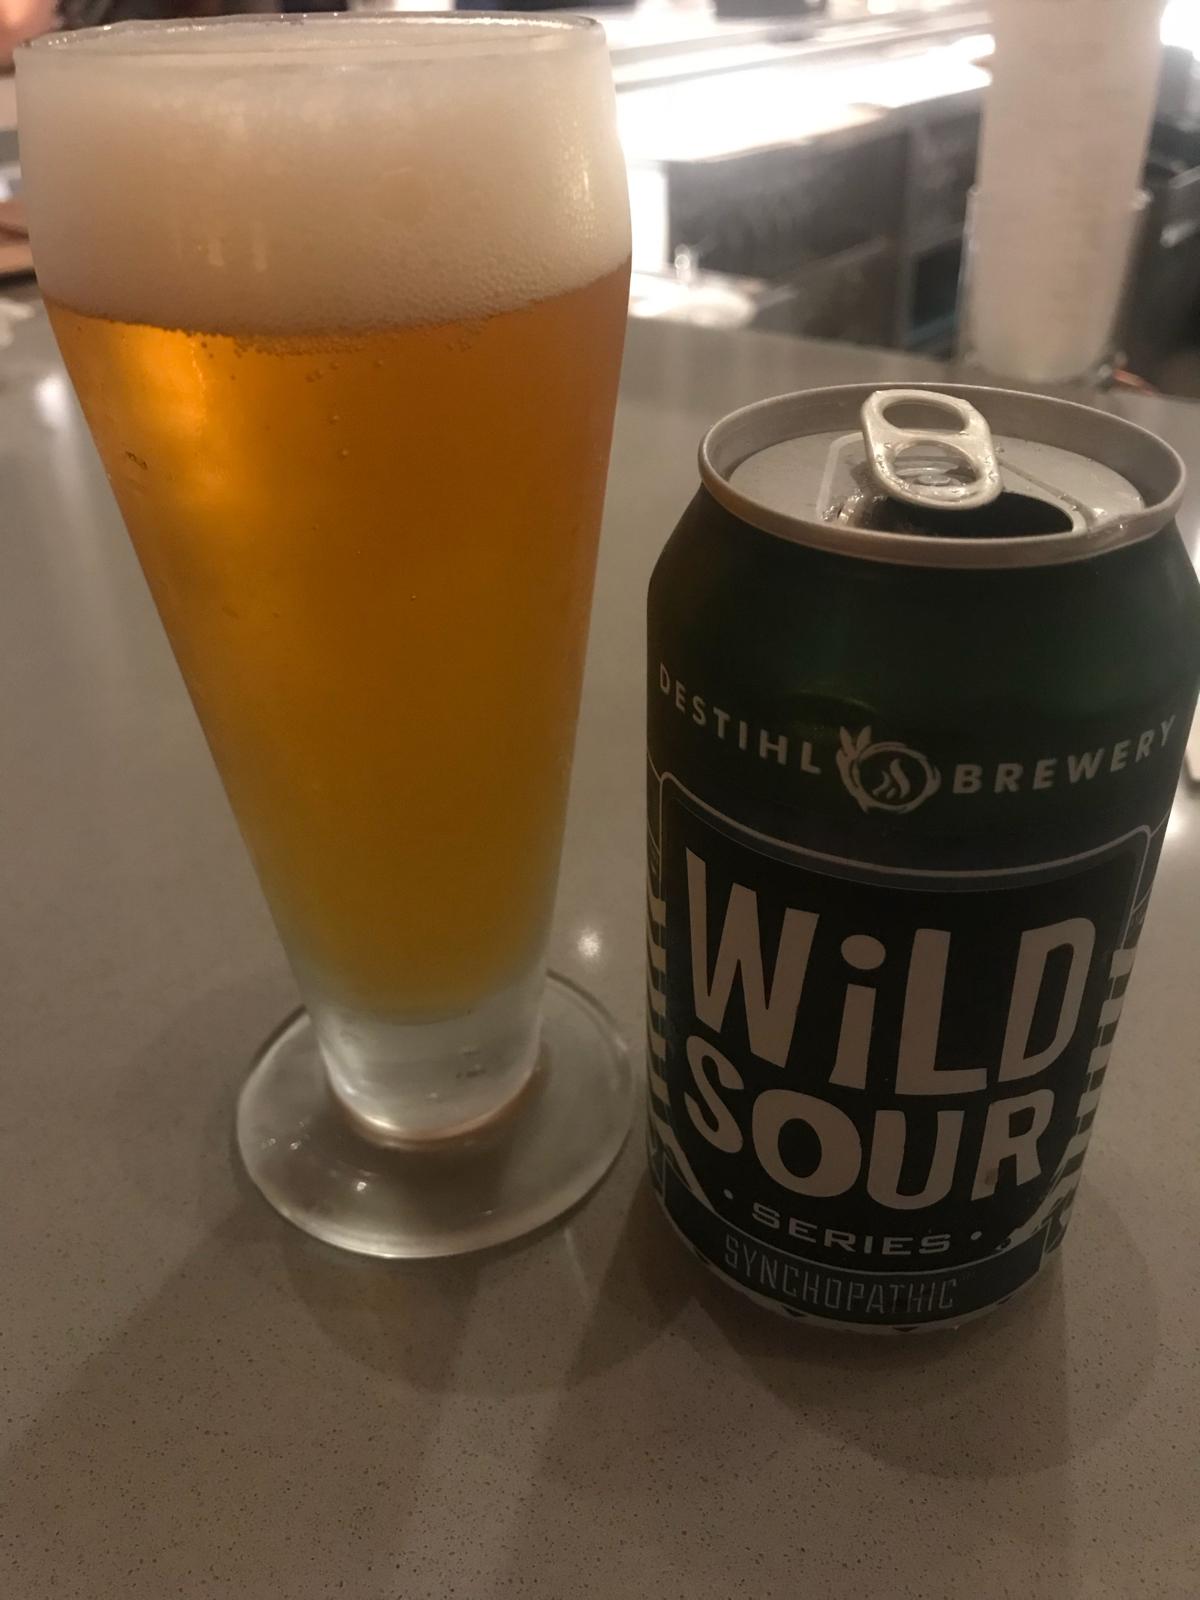 Wild Sour Series: Synchopathic